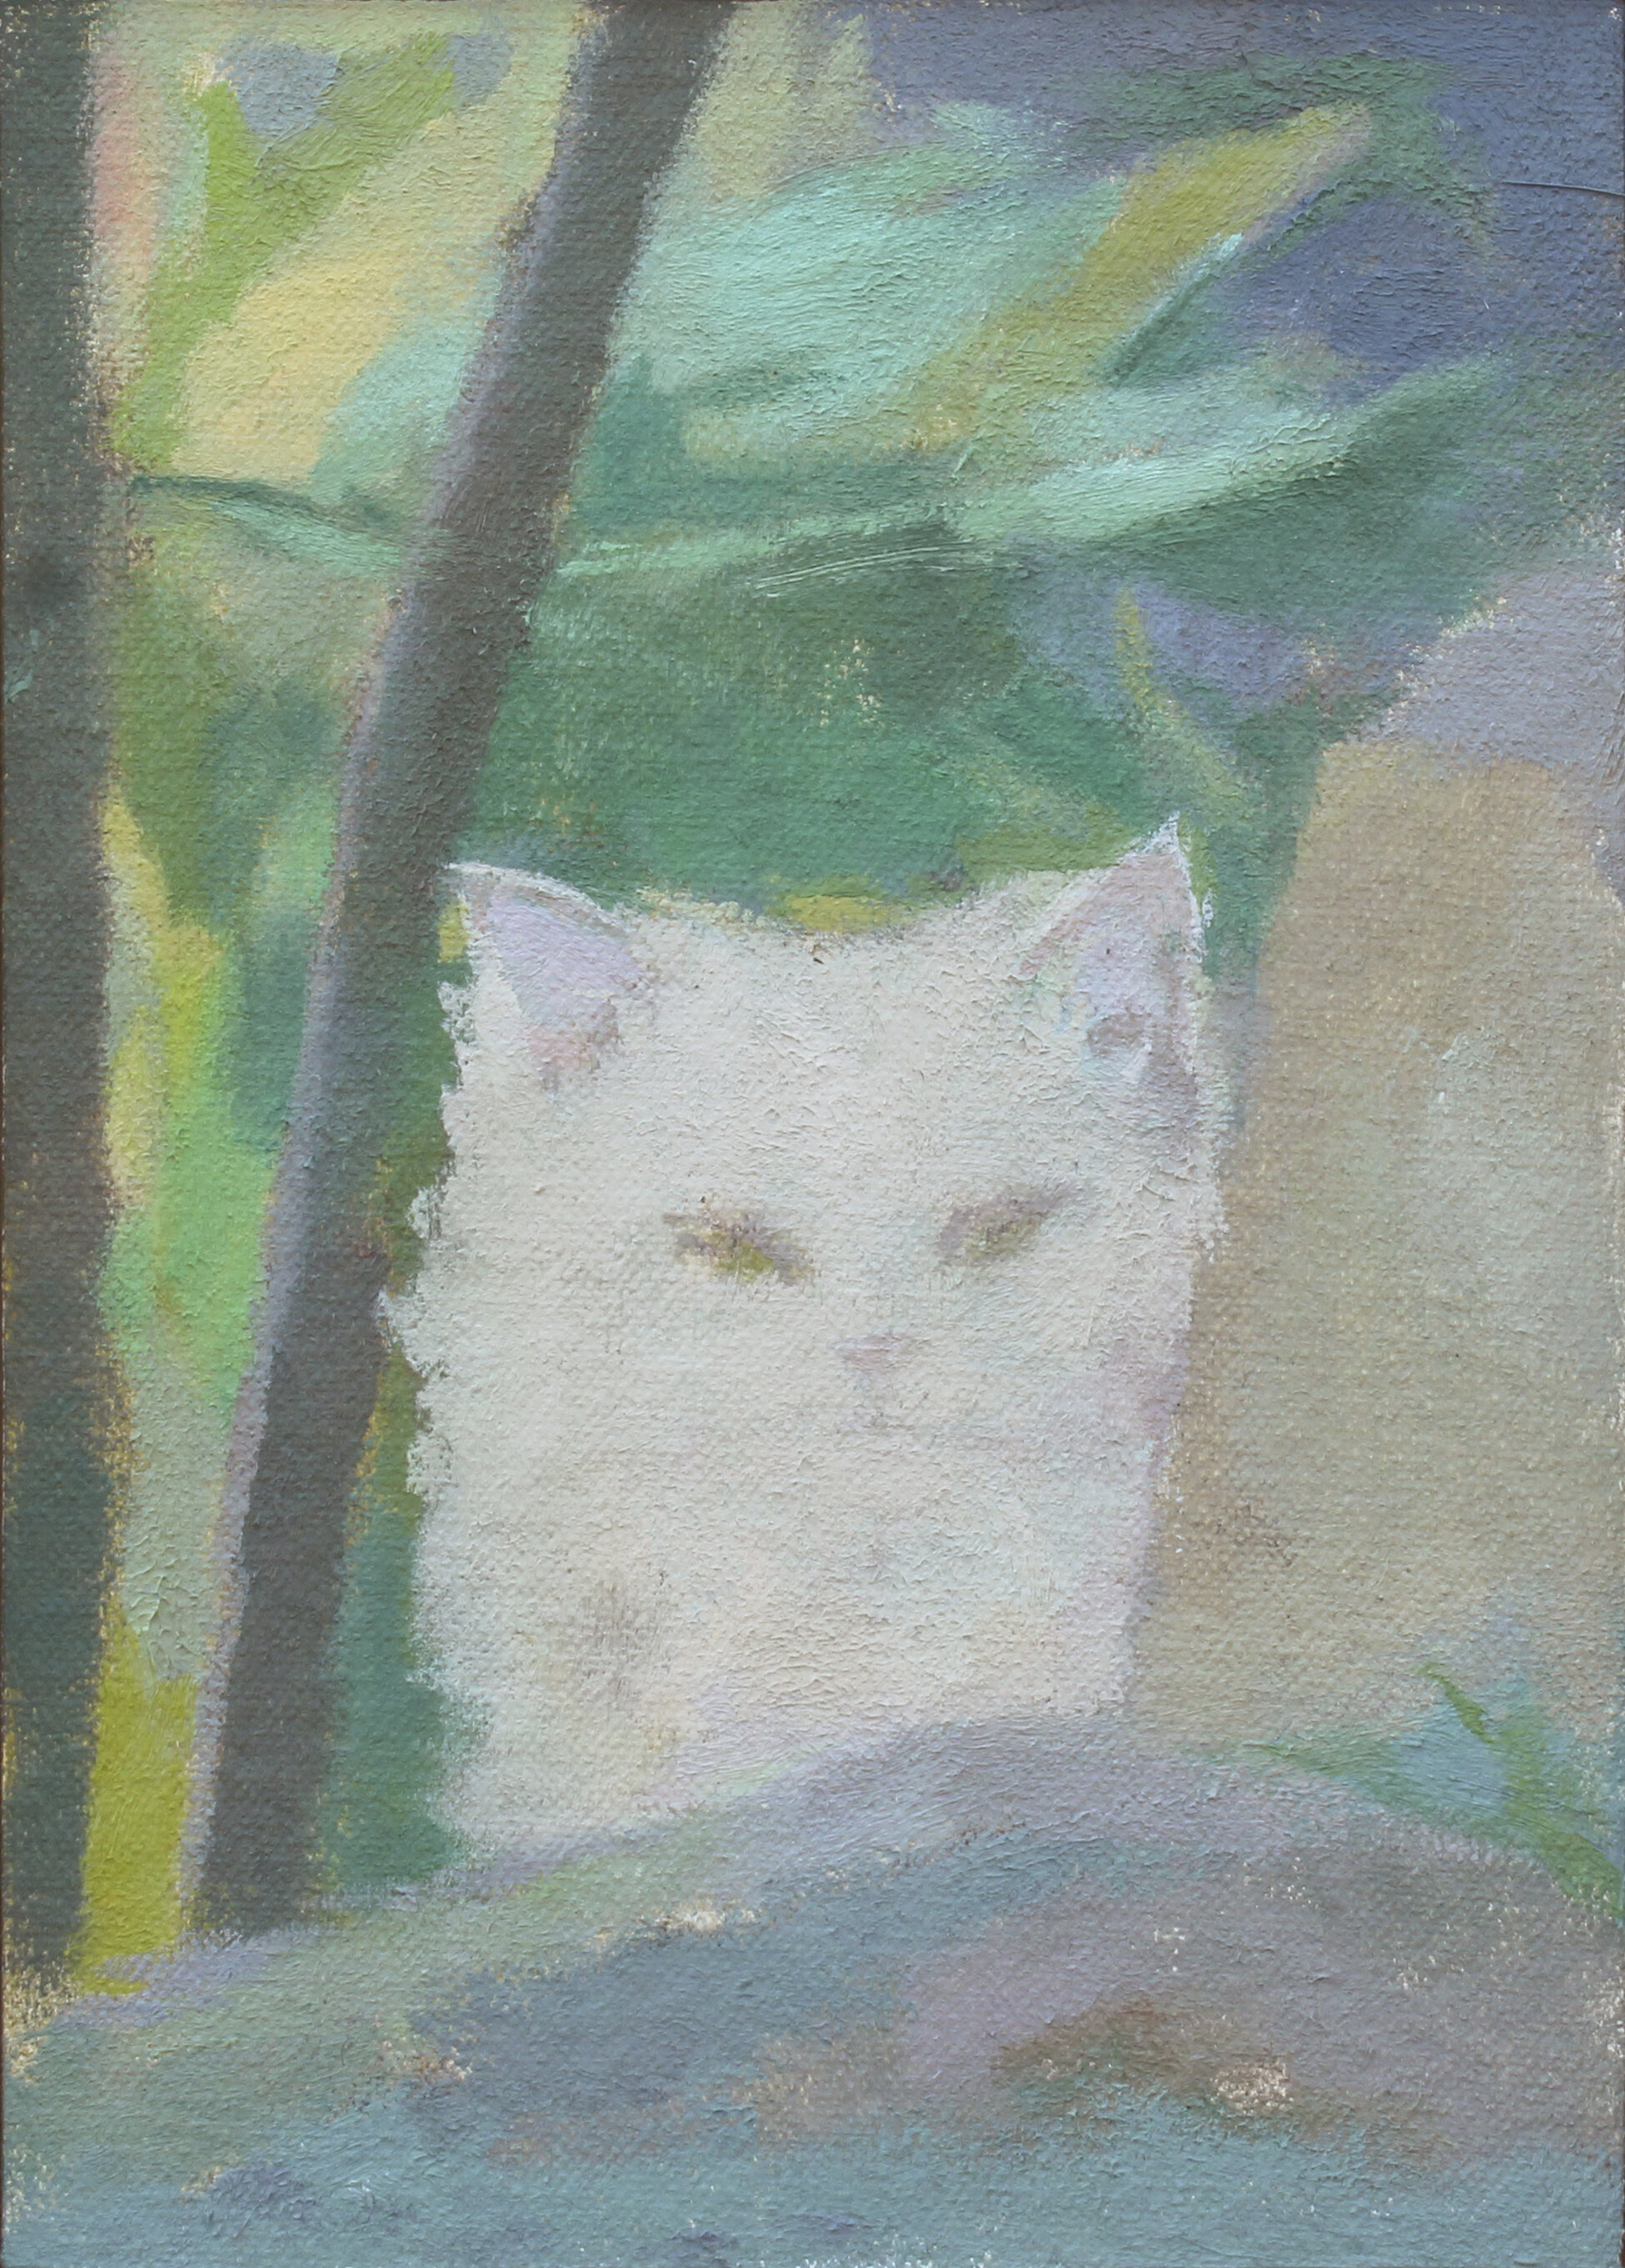    White Cat Behind a Rock   oil on canvas 5 x 7” 2020  private collection California 